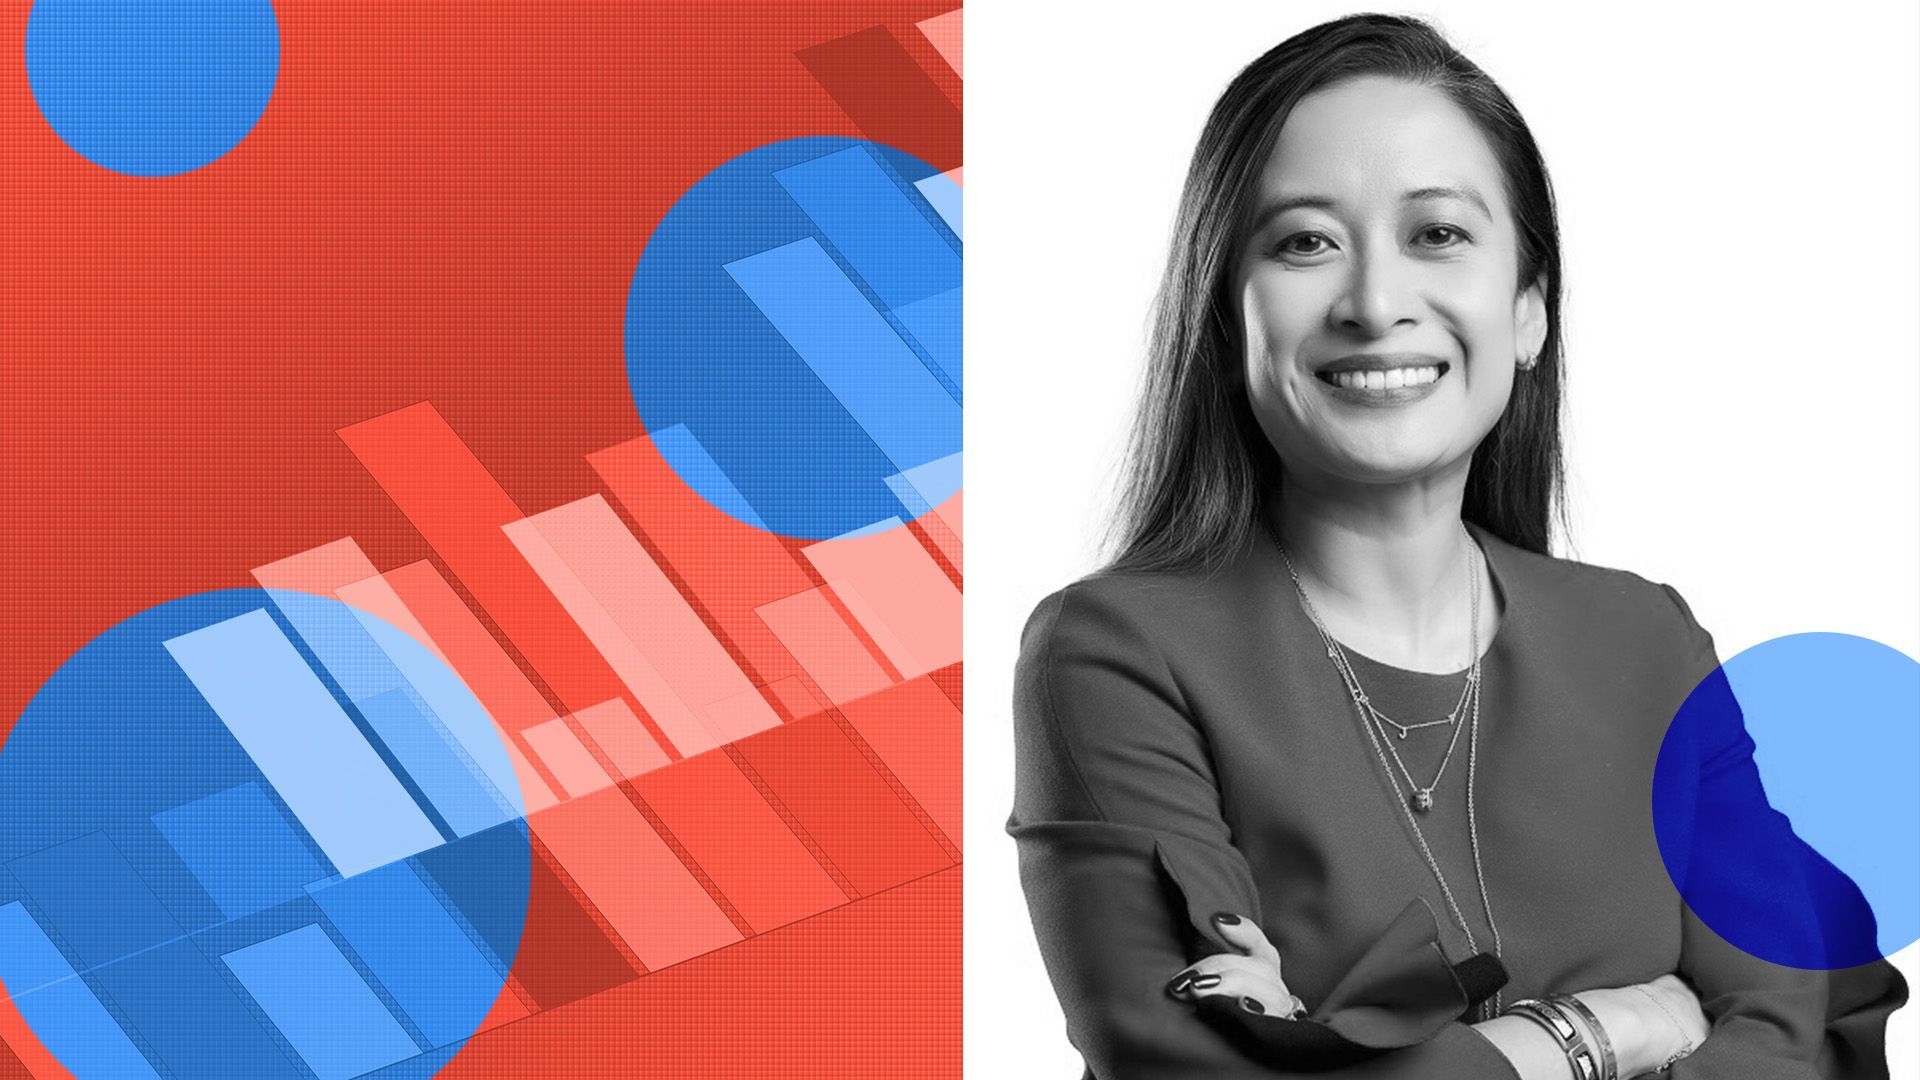 photo illustration of camilla macapili anguille of mubadala investments surrounded by circles and charts